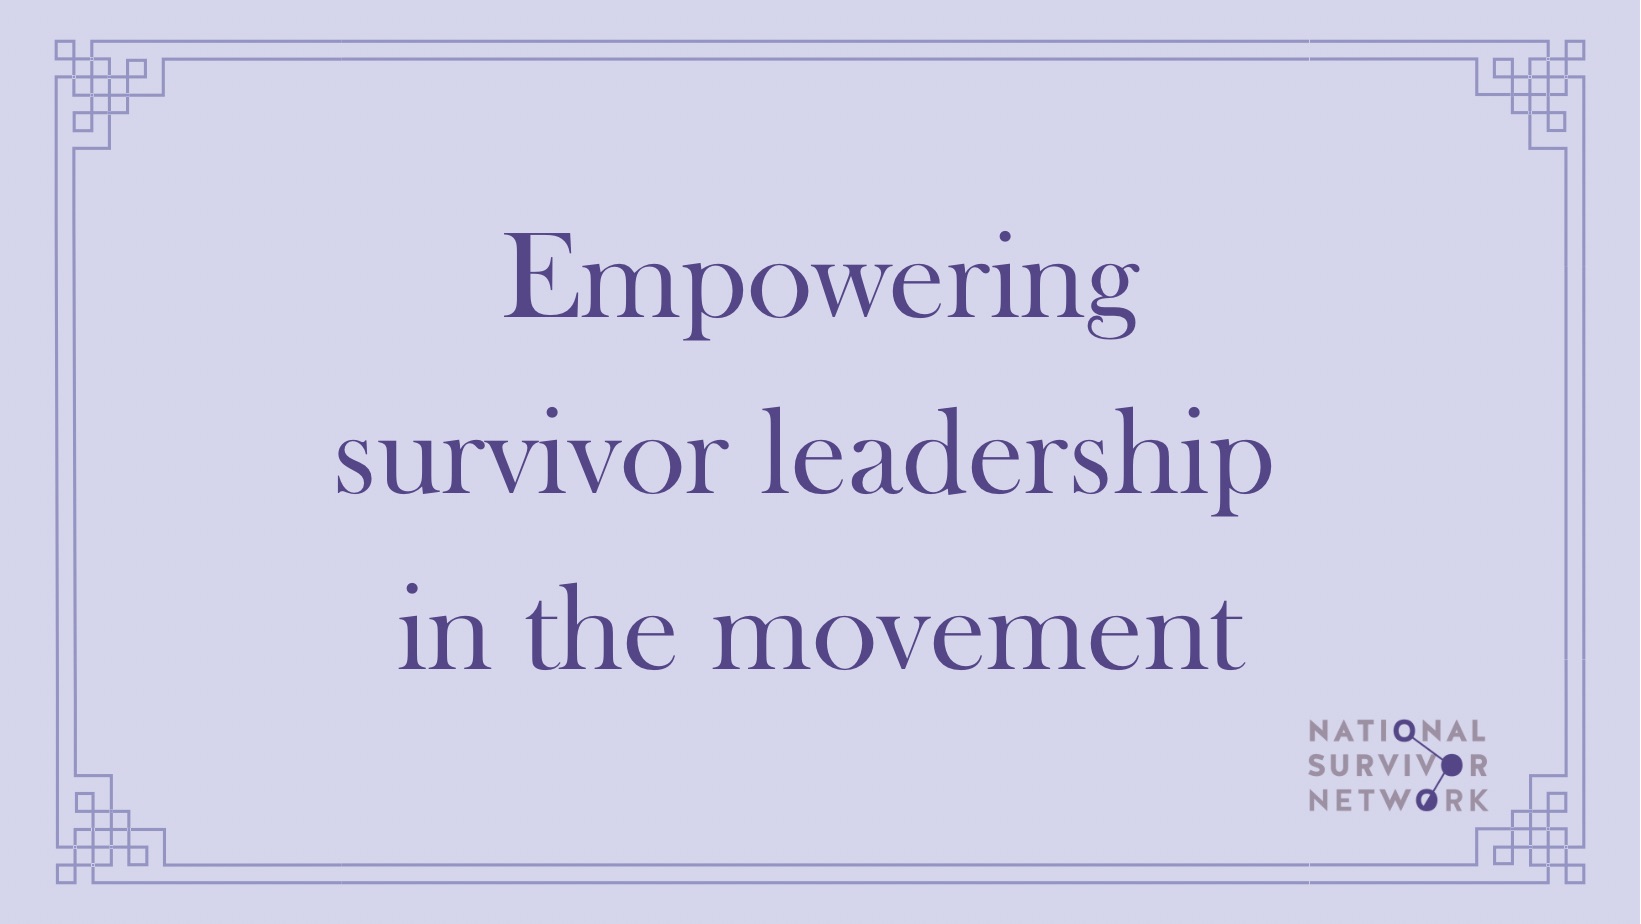 Image says "Empowering survivor leadership in the movement"